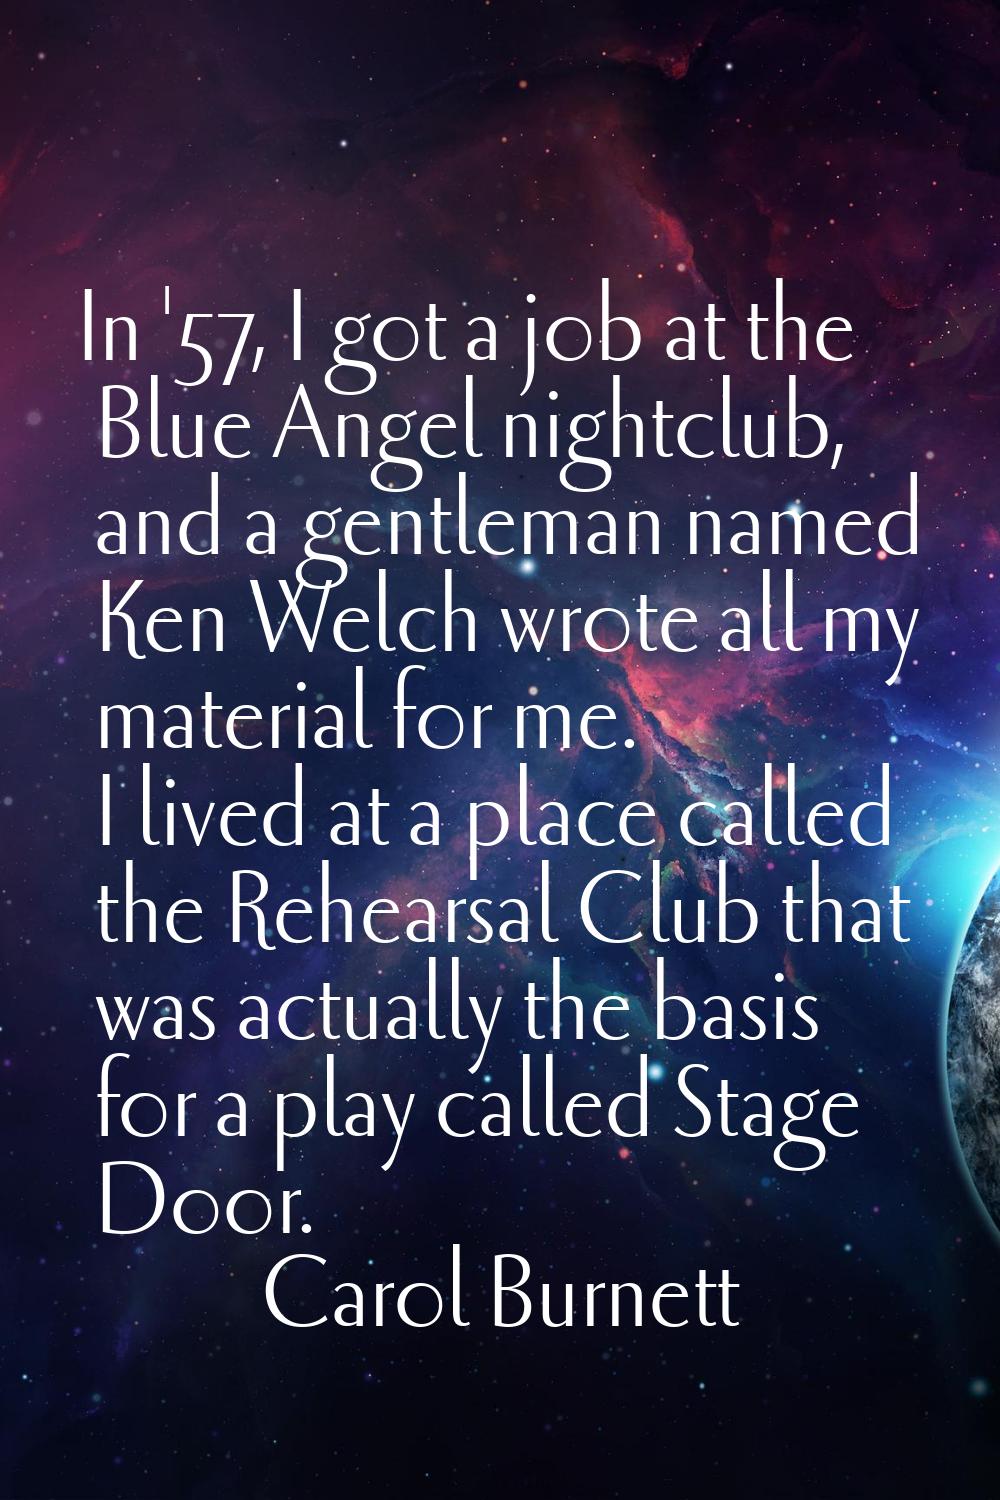 In '57, I got a job at the Blue Angel nightclub, and a gentleman named Ken Welch wrote all my mater